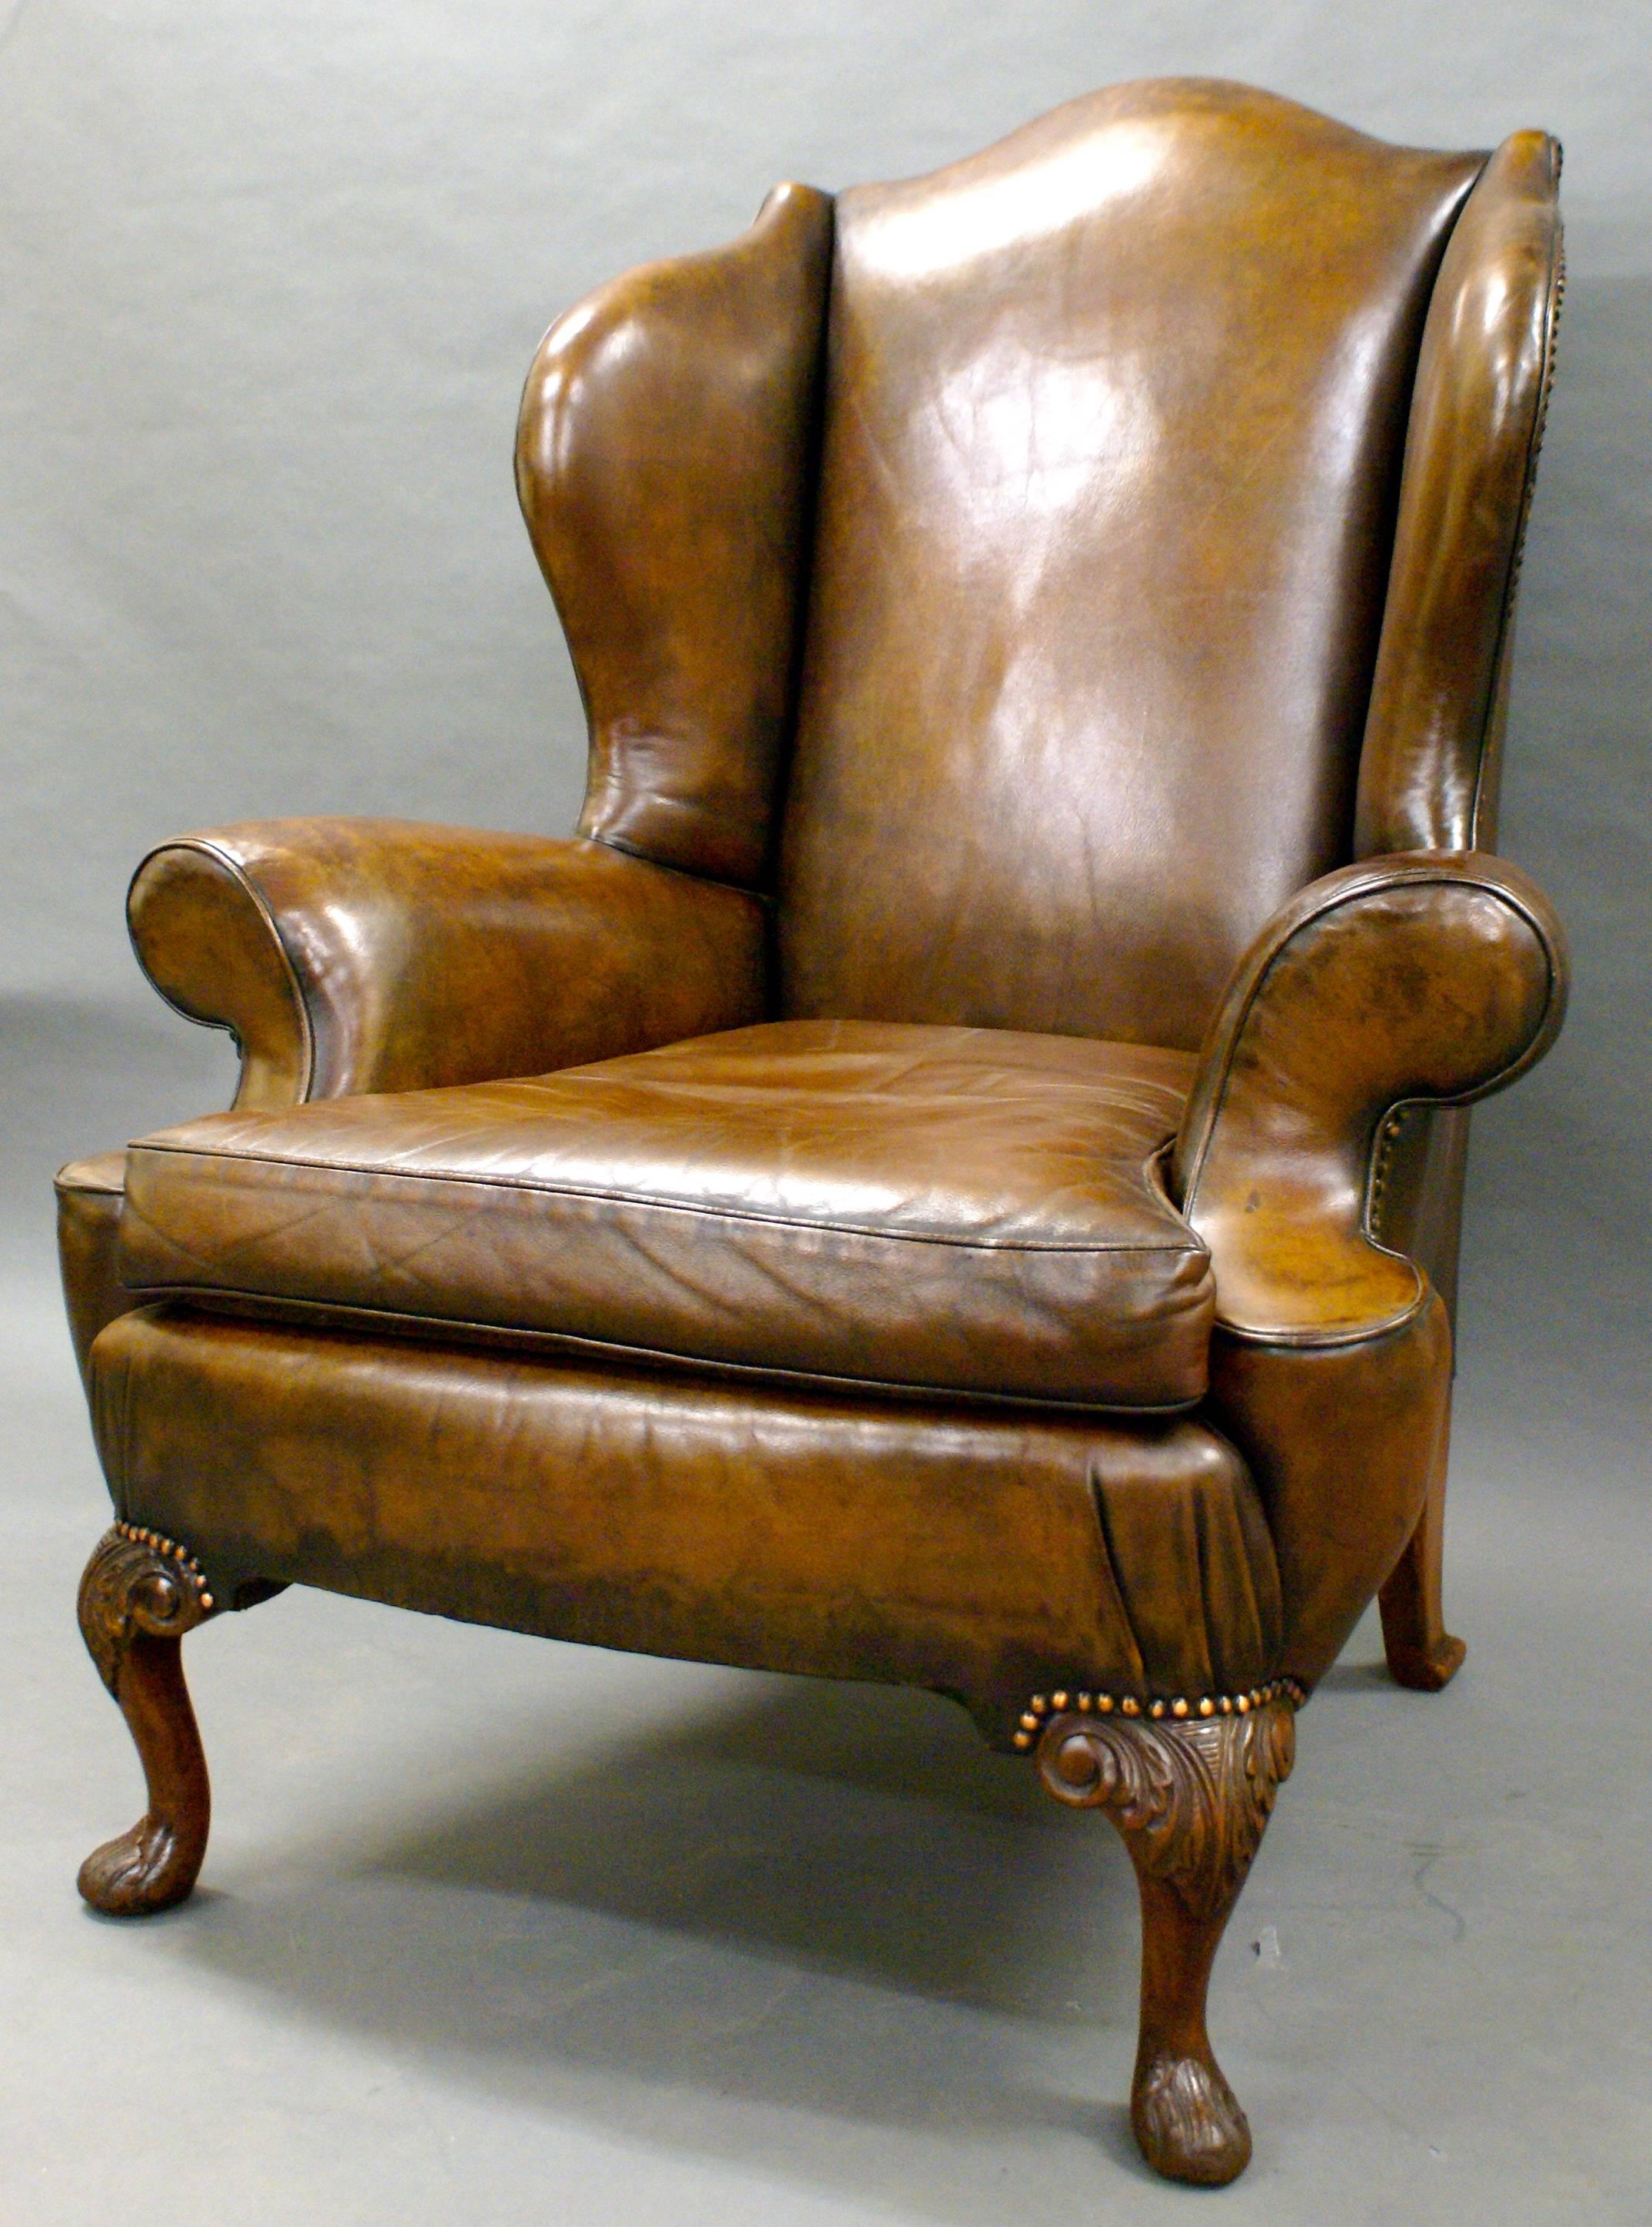 This impressive chair stands on mahogany cabriole legs with pad feet, both of which are carved. The frame is very well shaped with out-swept arms and strongly defined wings and back. The chair and upholstery are in great condition.